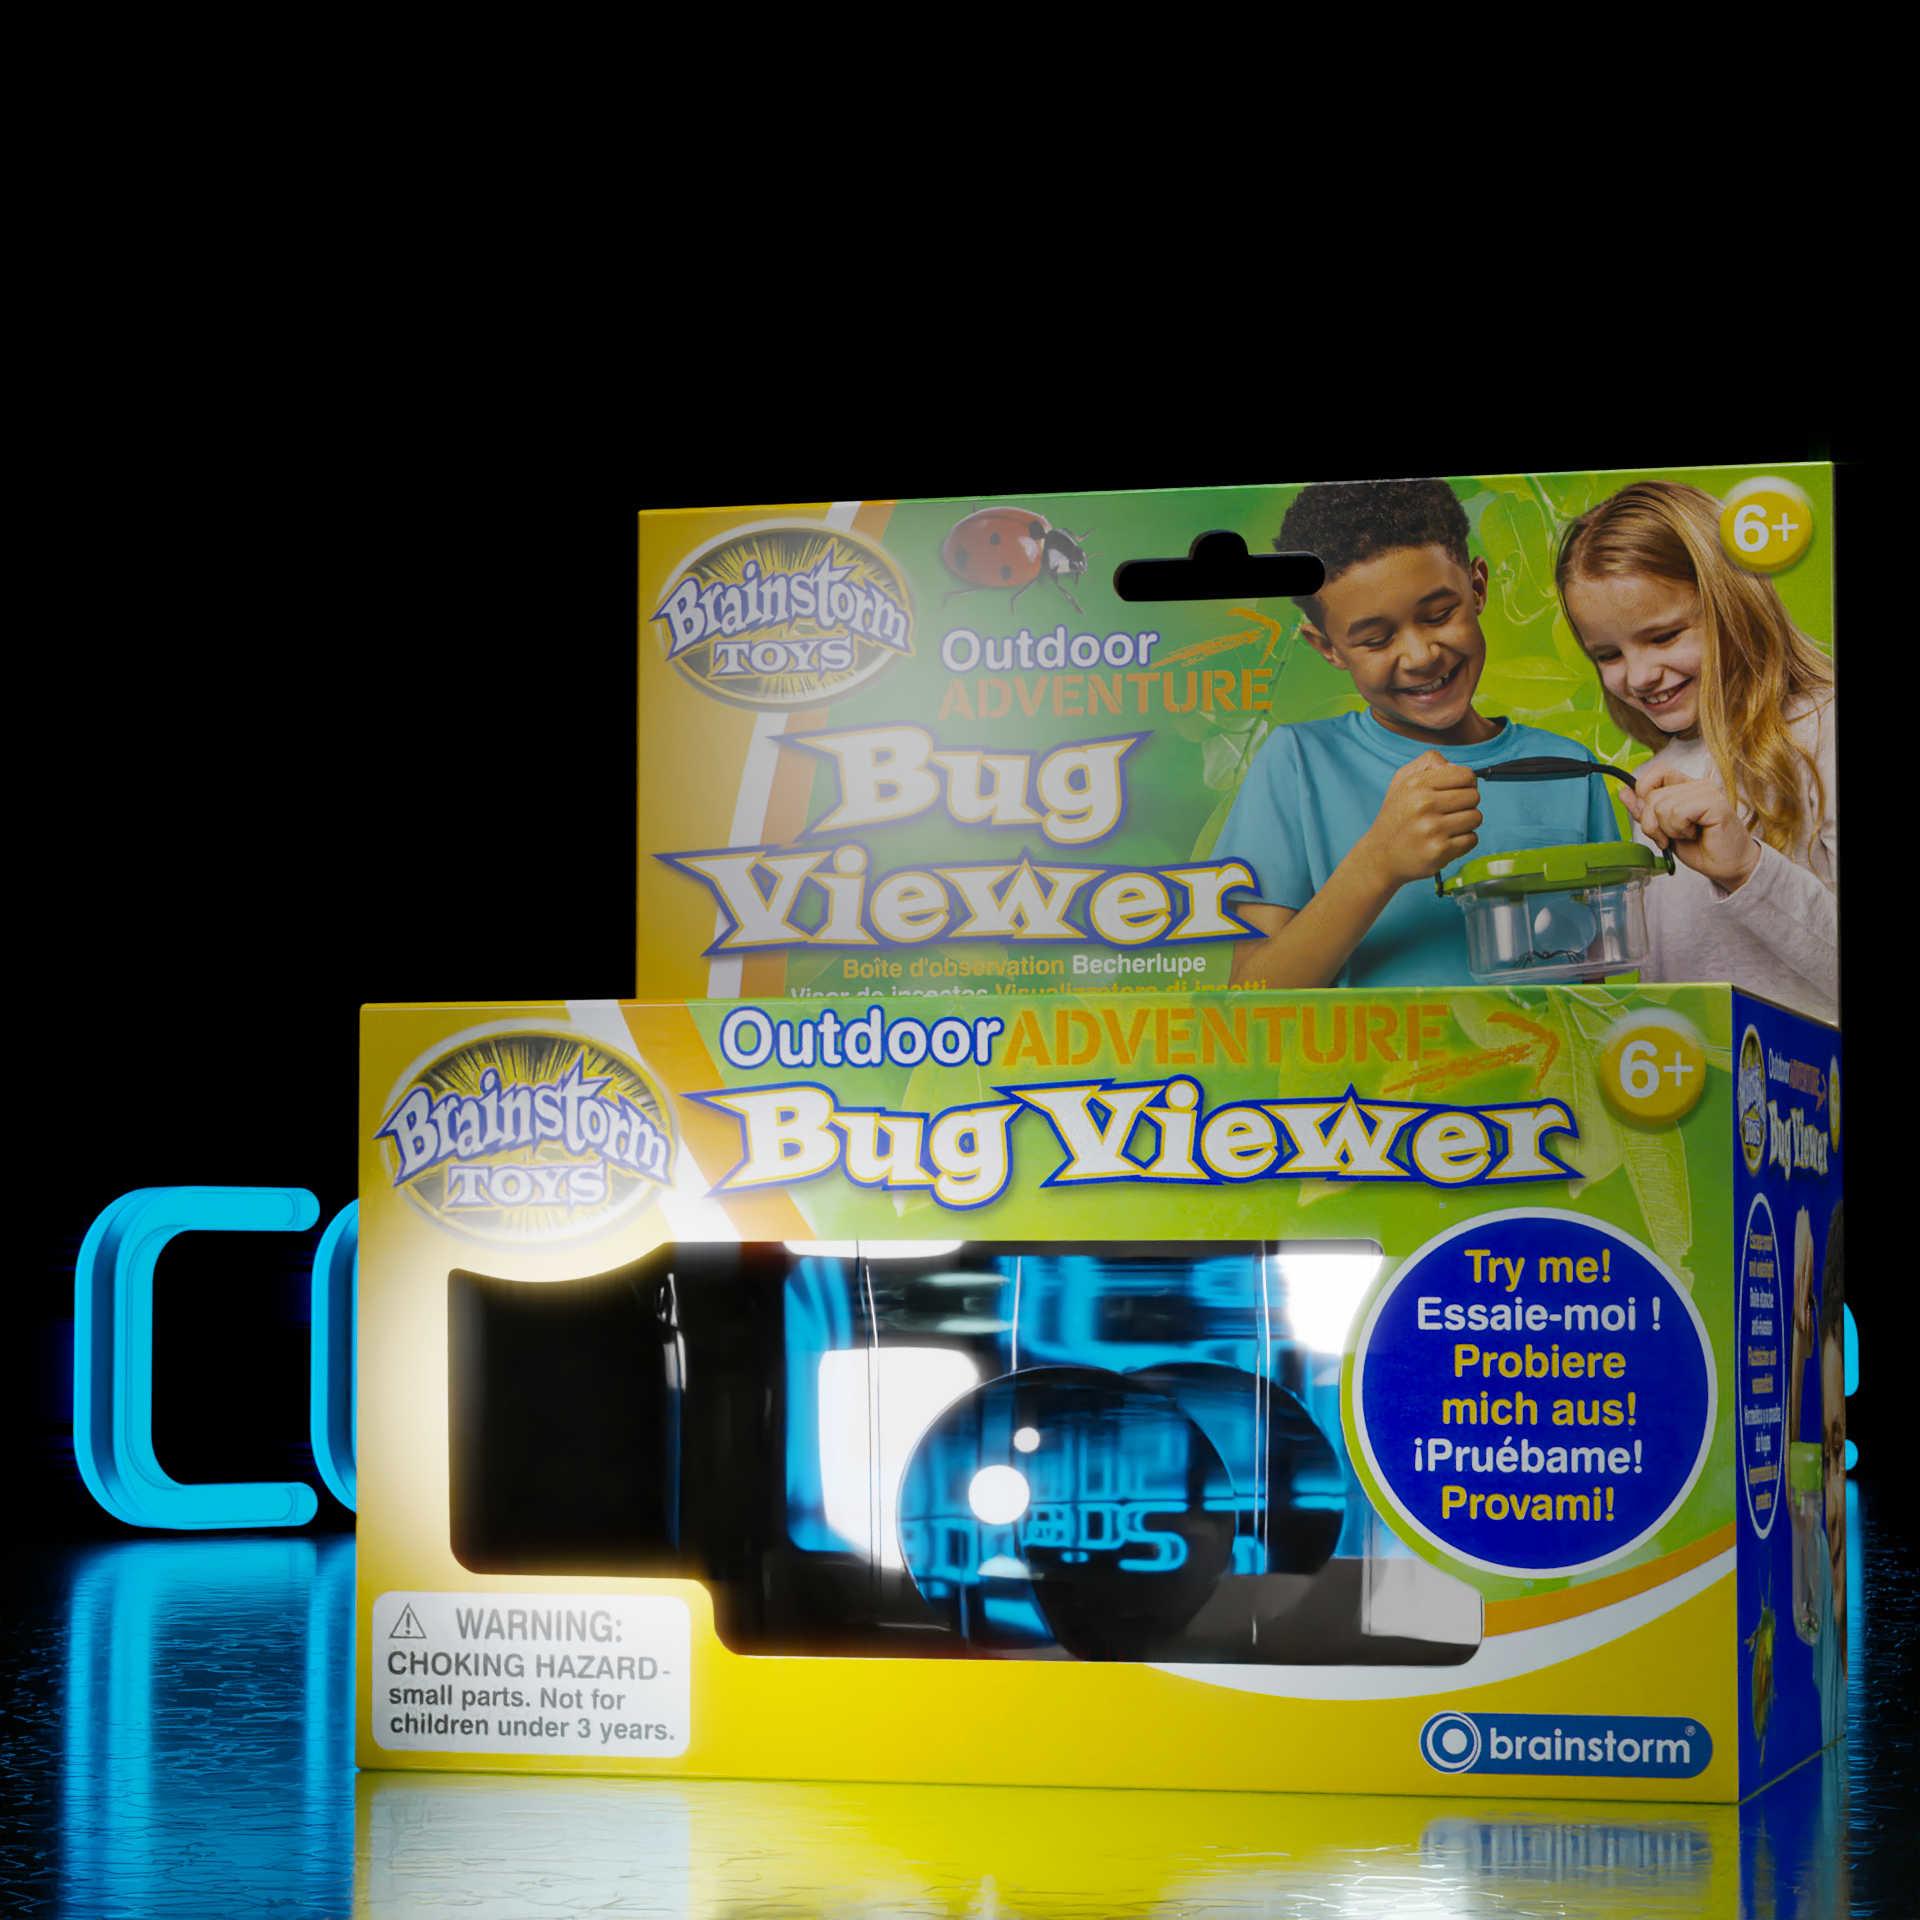 Close-up Front View of the Brainstorm Outdoor Adventure Bug Viewer box on plain background